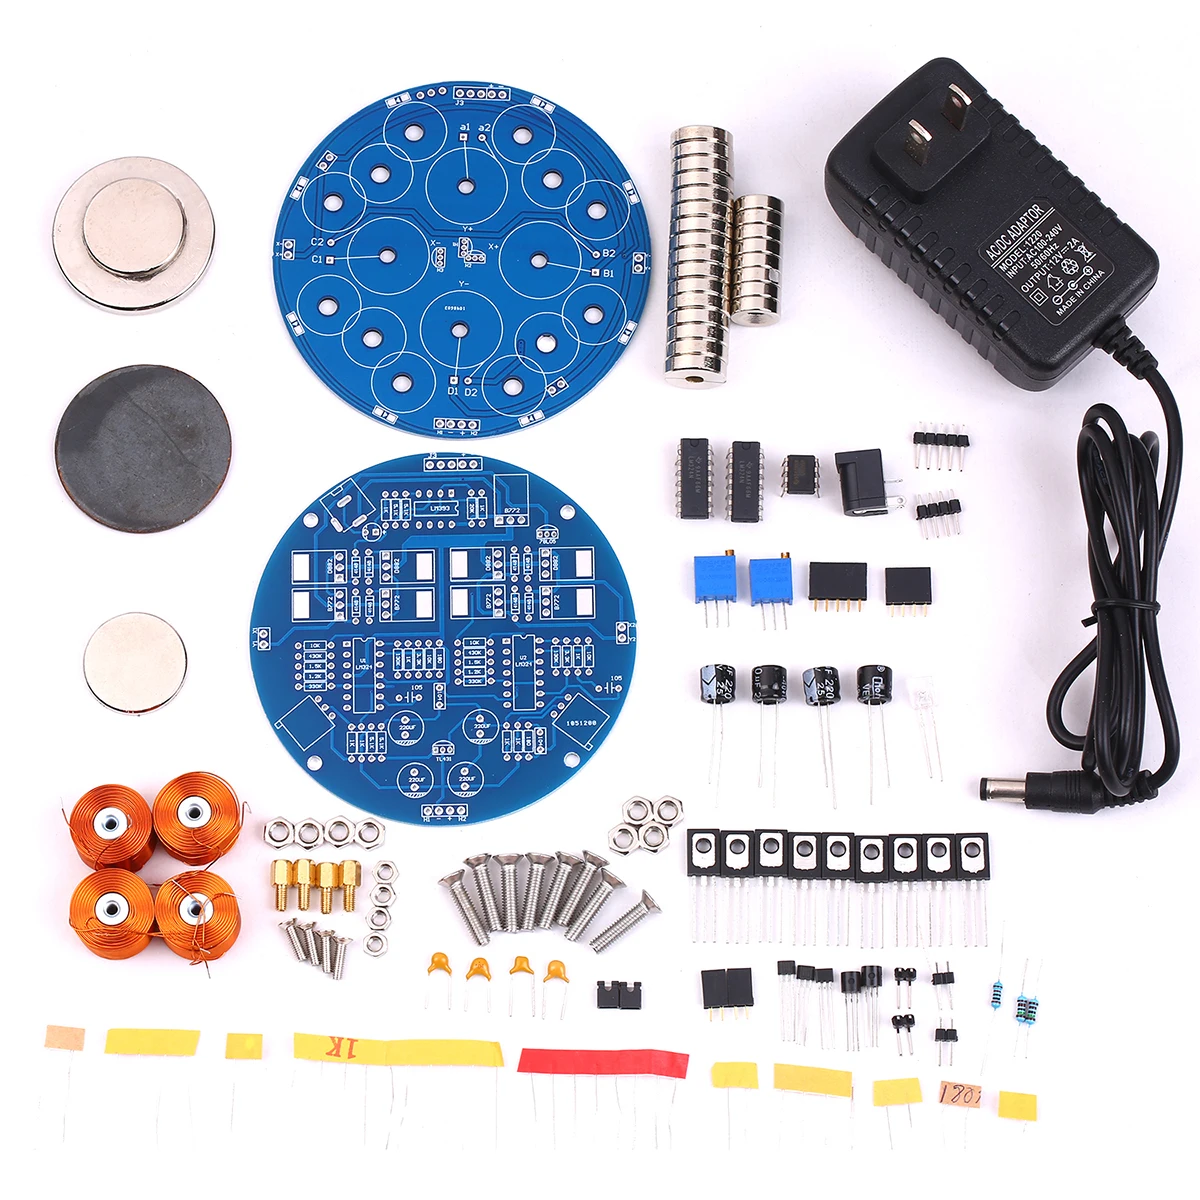 

DIY Magnetic Levitation Kit Magnetic Suspension DIY Module Kit Magnetic Floating DIY Kit Floating Toy for students to learn